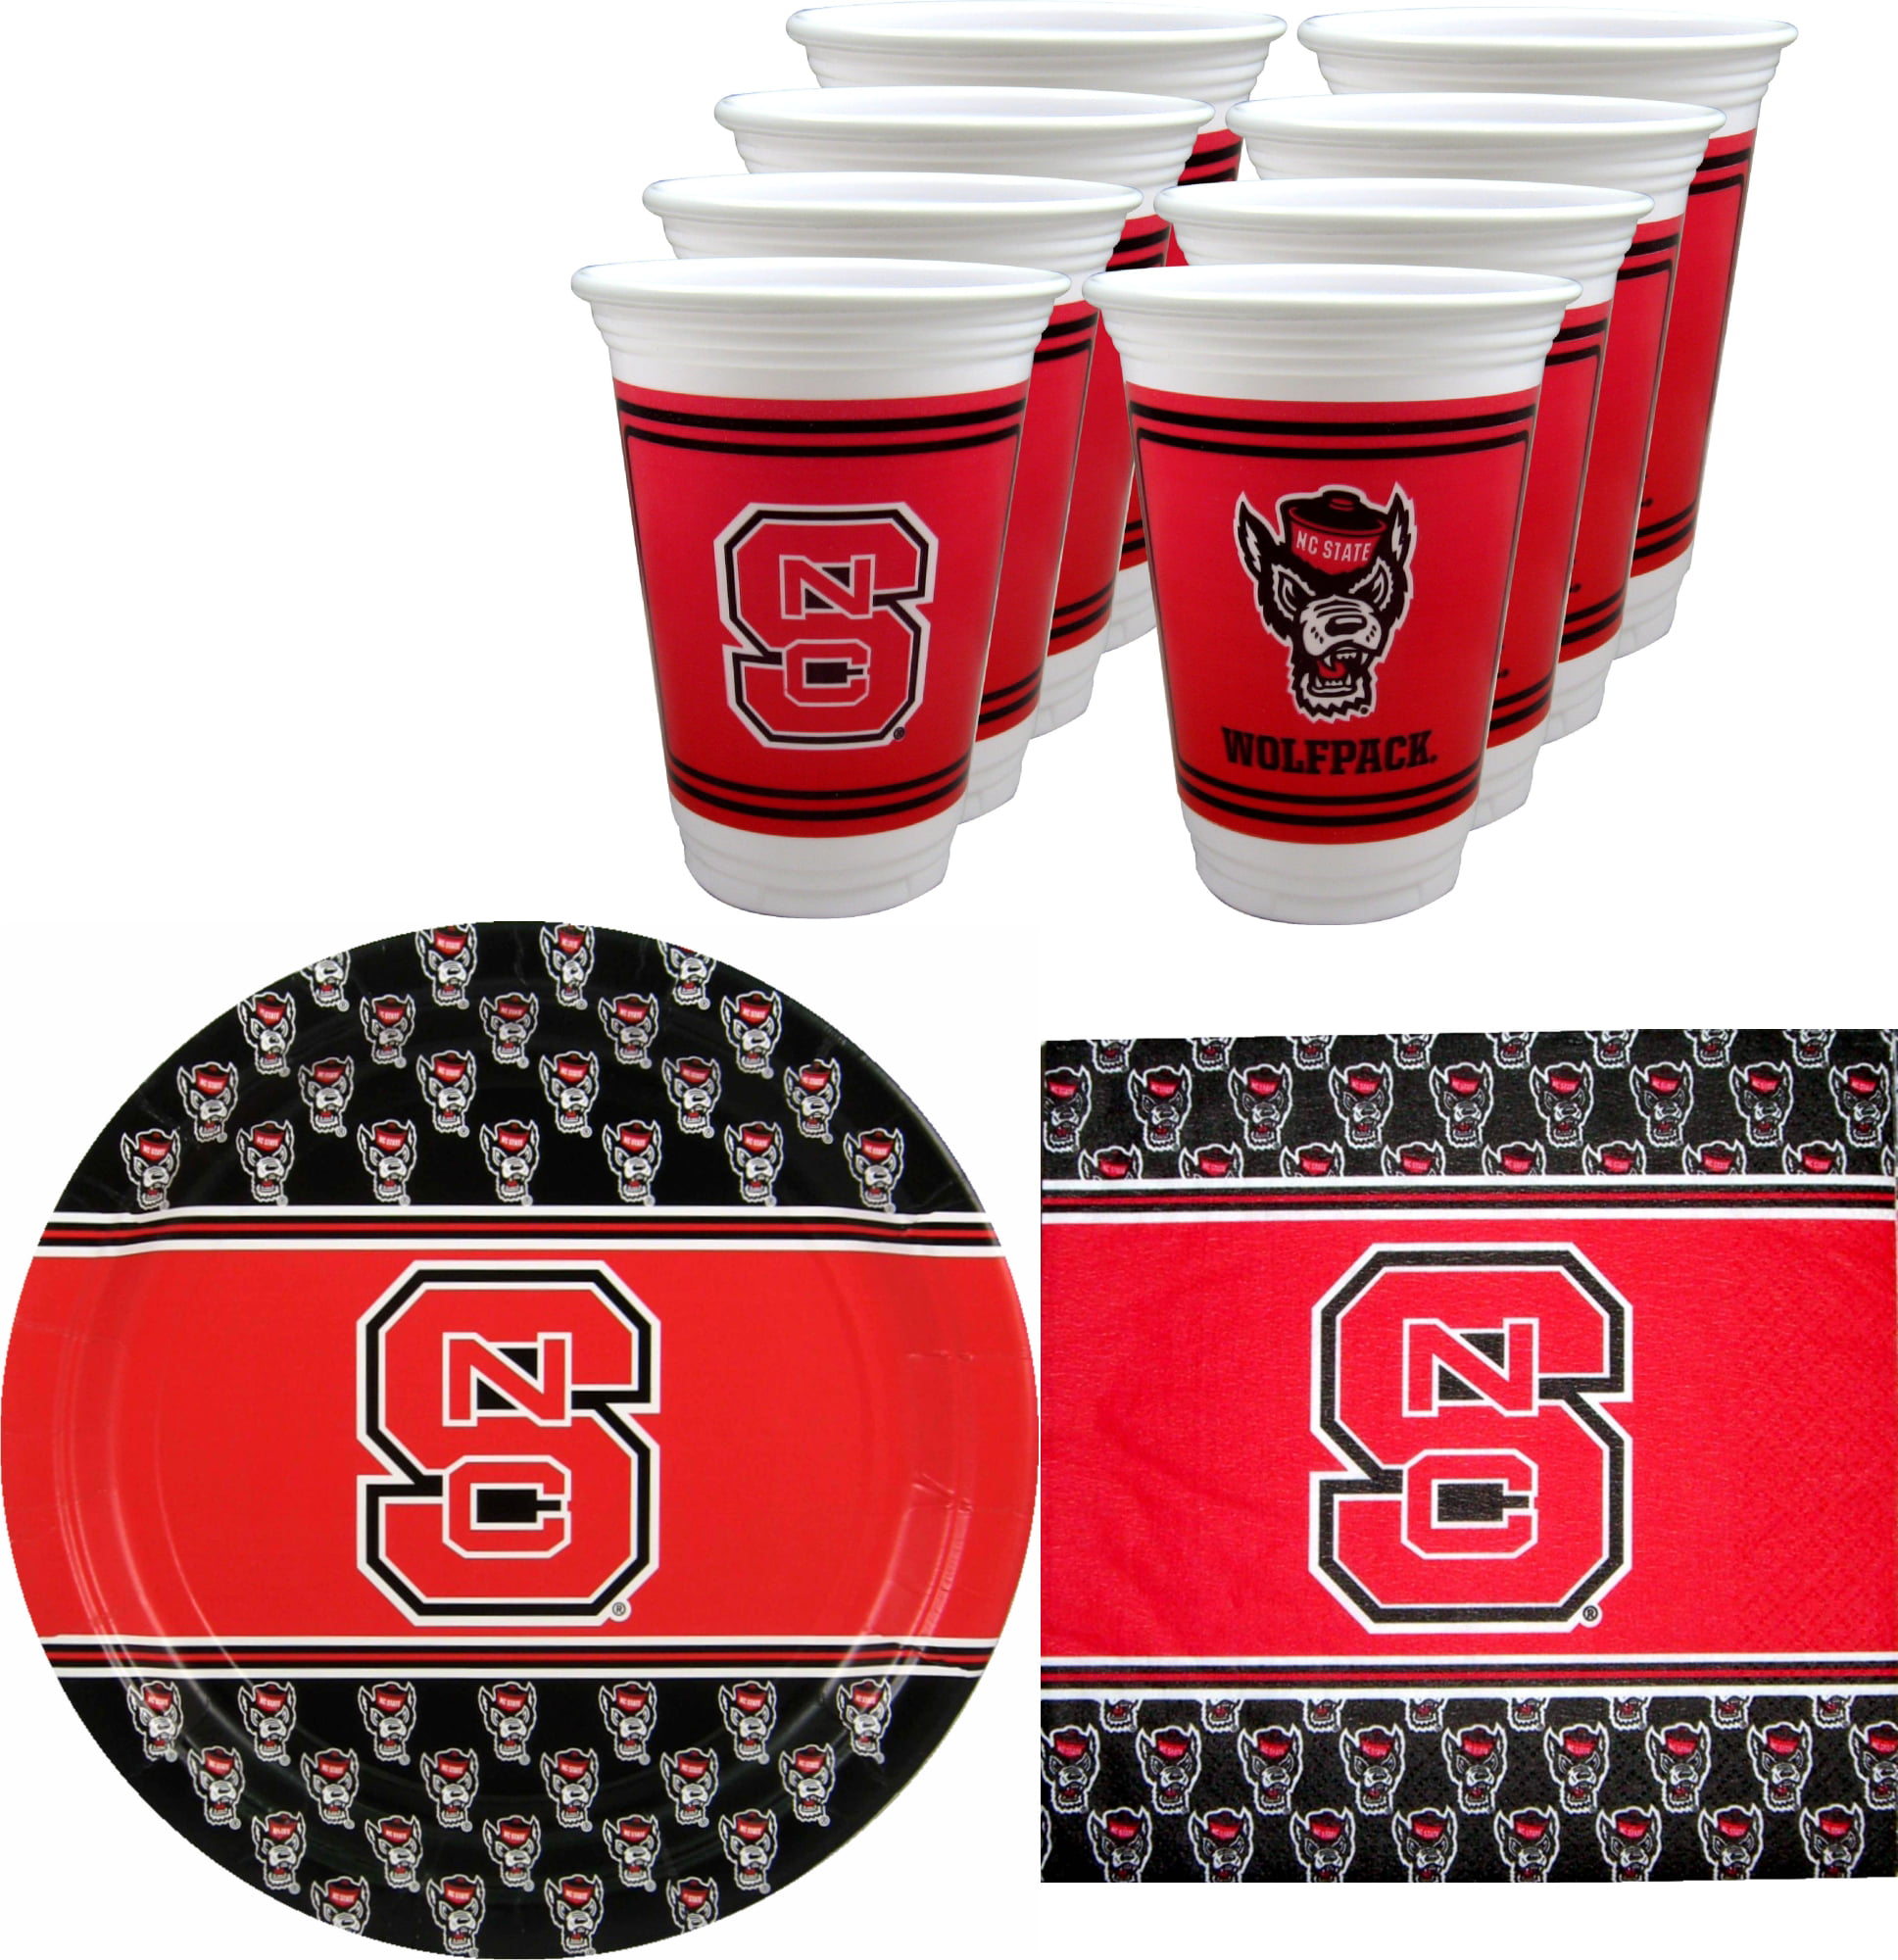 64 Pieces Serves 32 NC State Wolfpack Napkins & Plates 